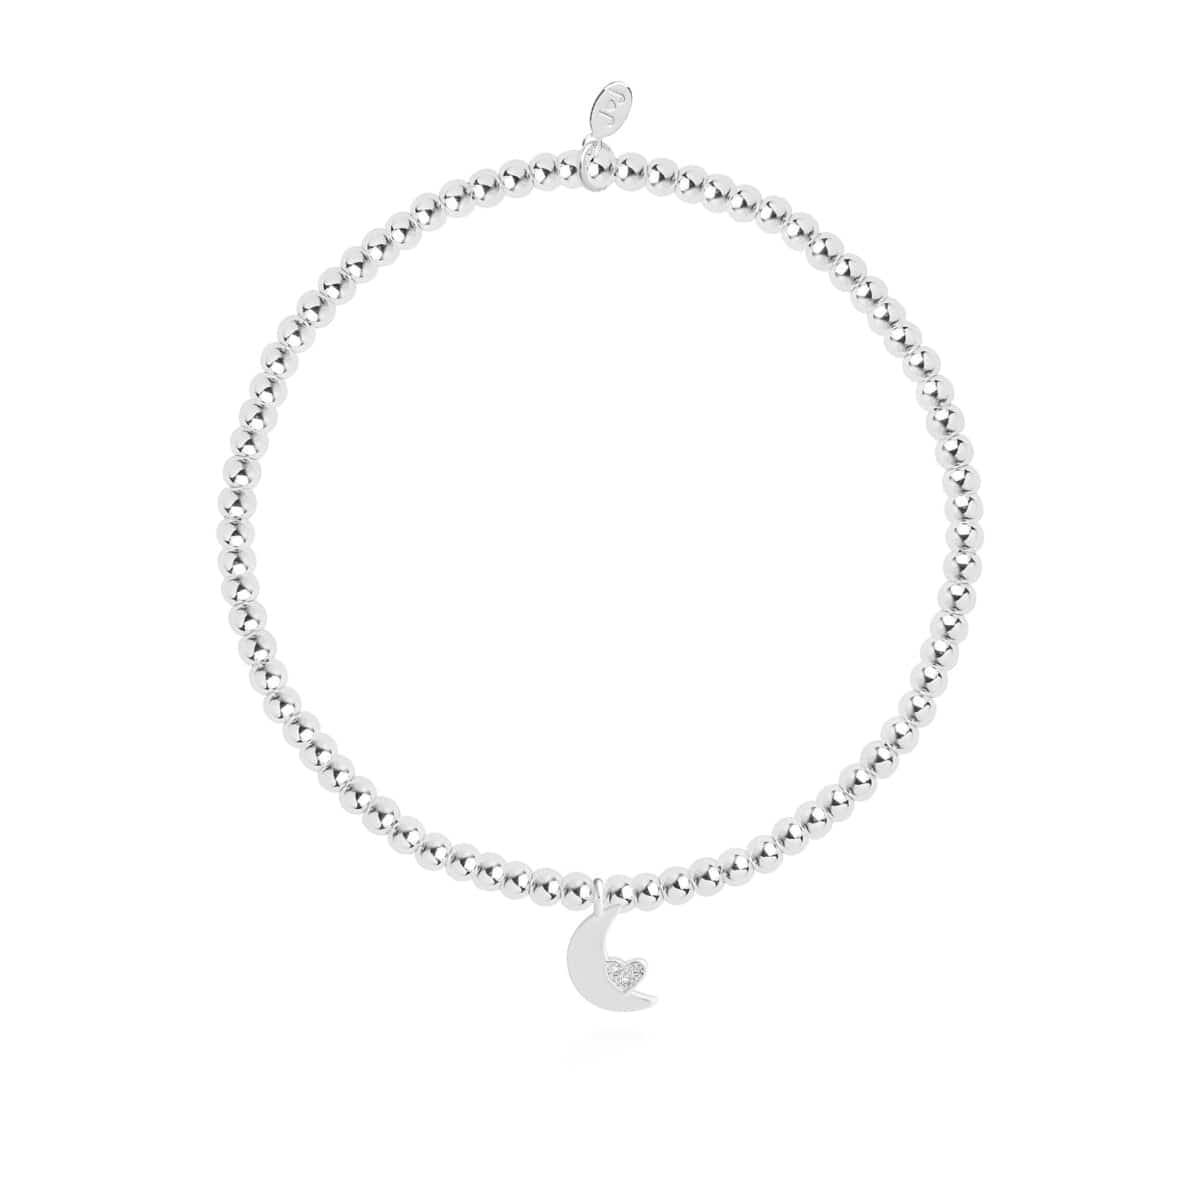 Joma Jewellery Bracelet Joma Jewellery Bracelet - a little Love You To The Moon And Back